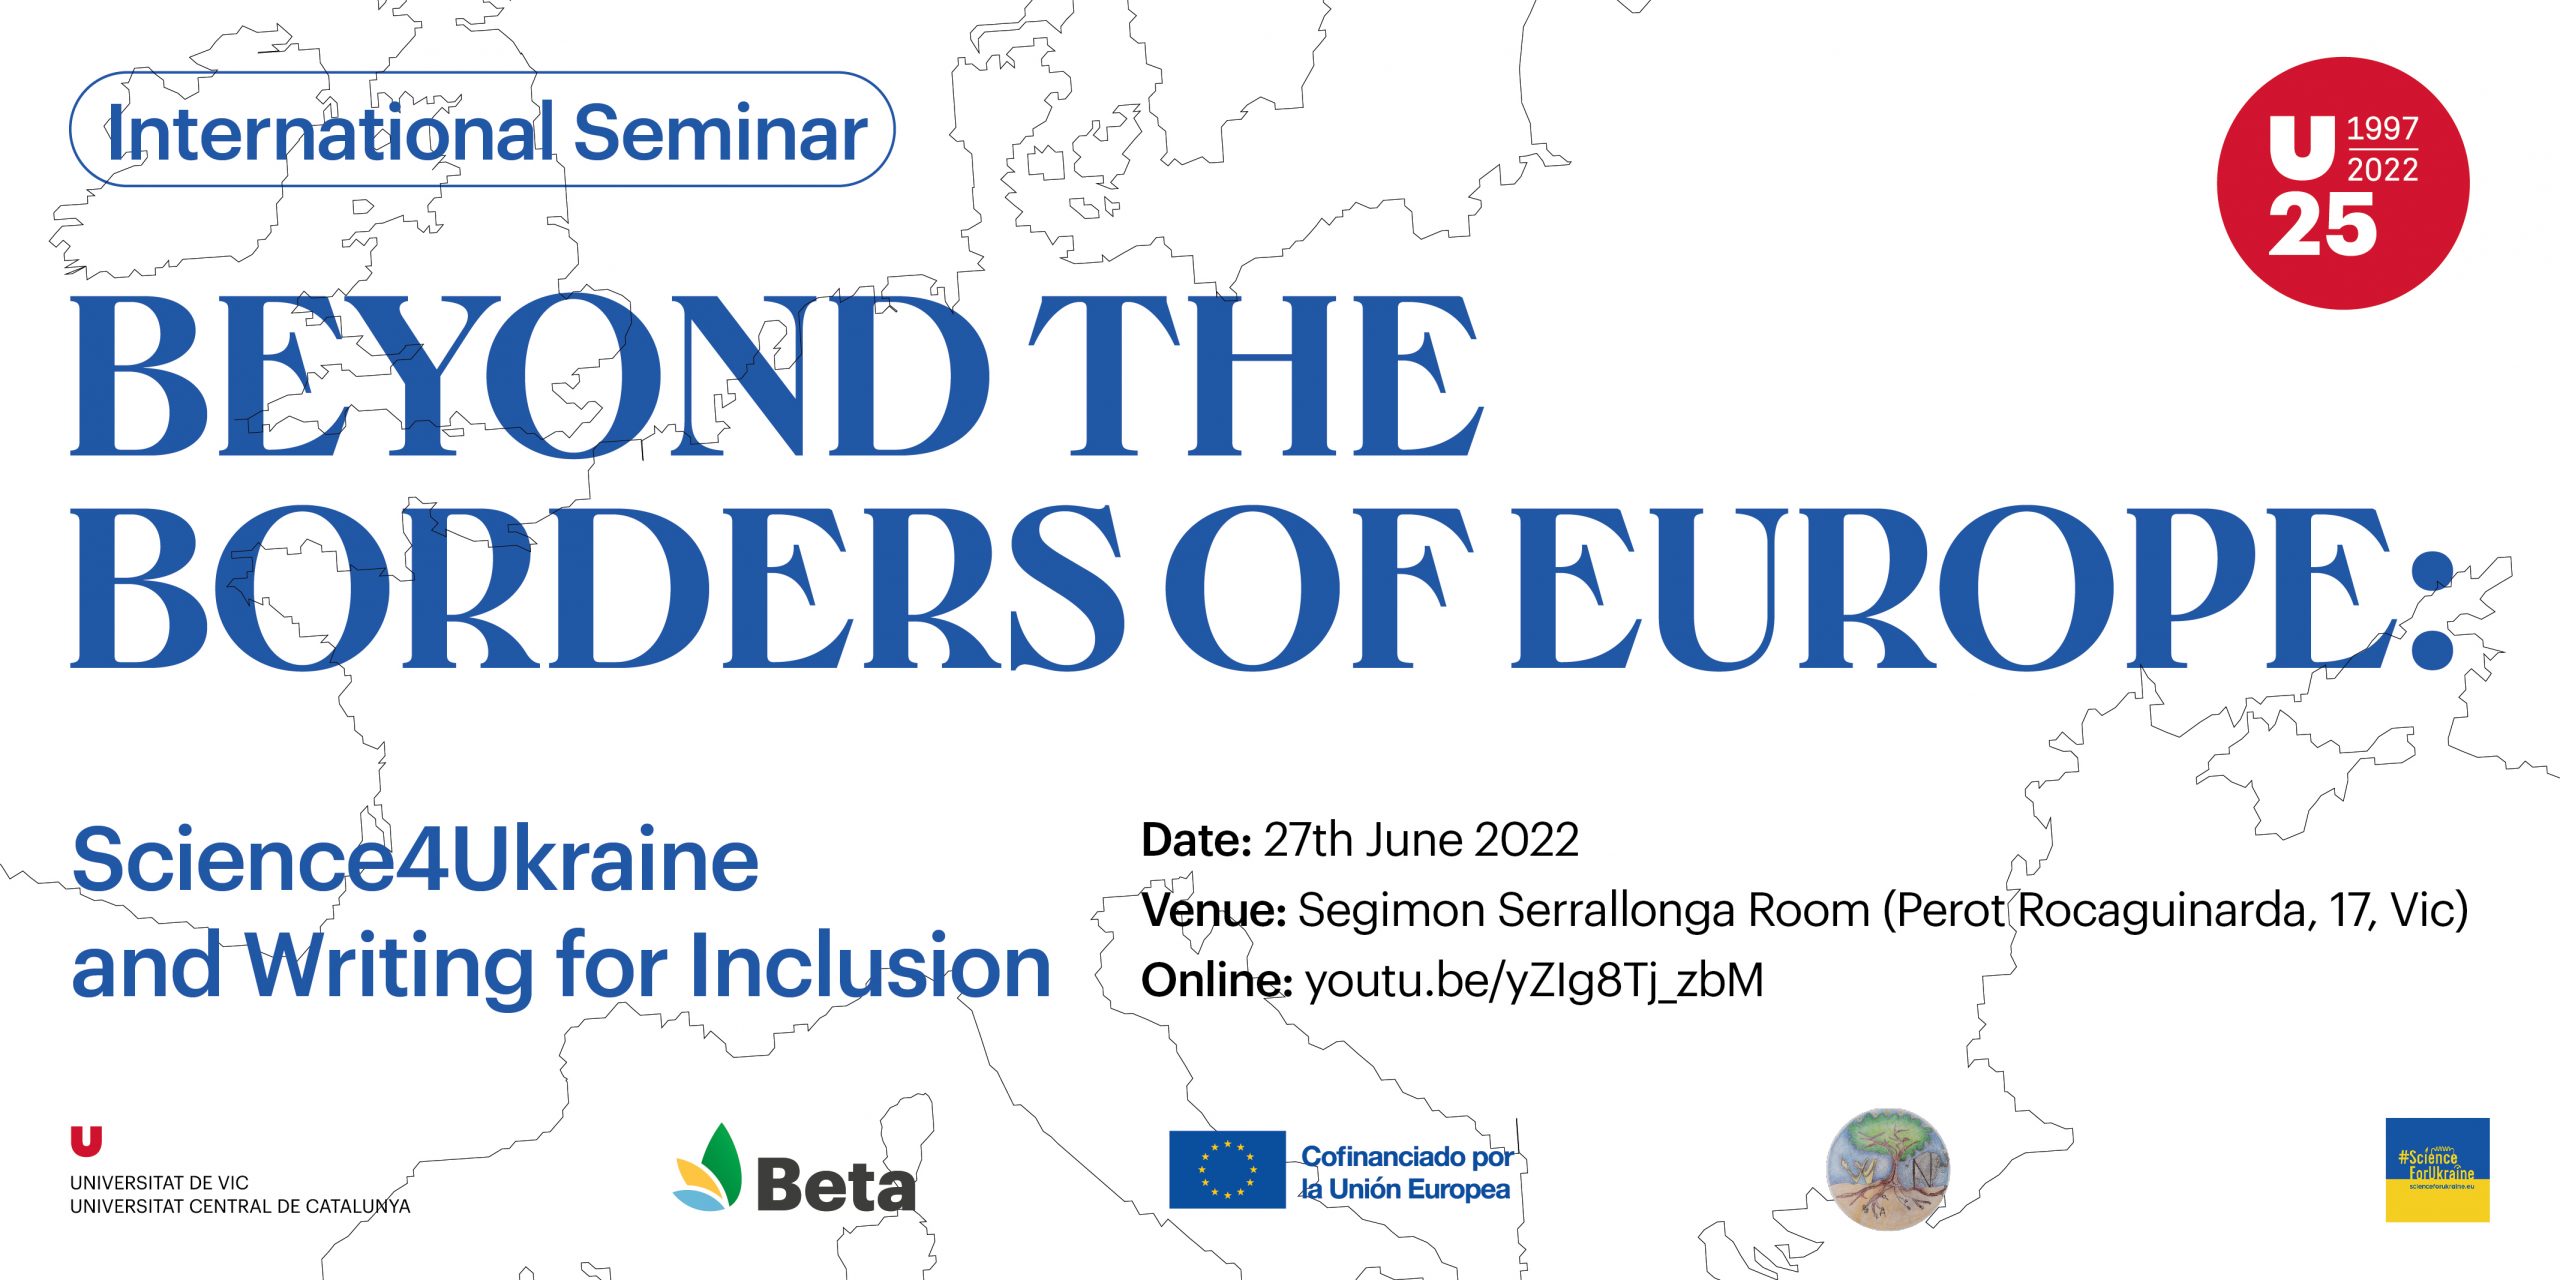 Participation in the International Seminar “Beyond the Borders of Europe: Science4Ukraine and Writing for Inclusion” by members of the WIN project